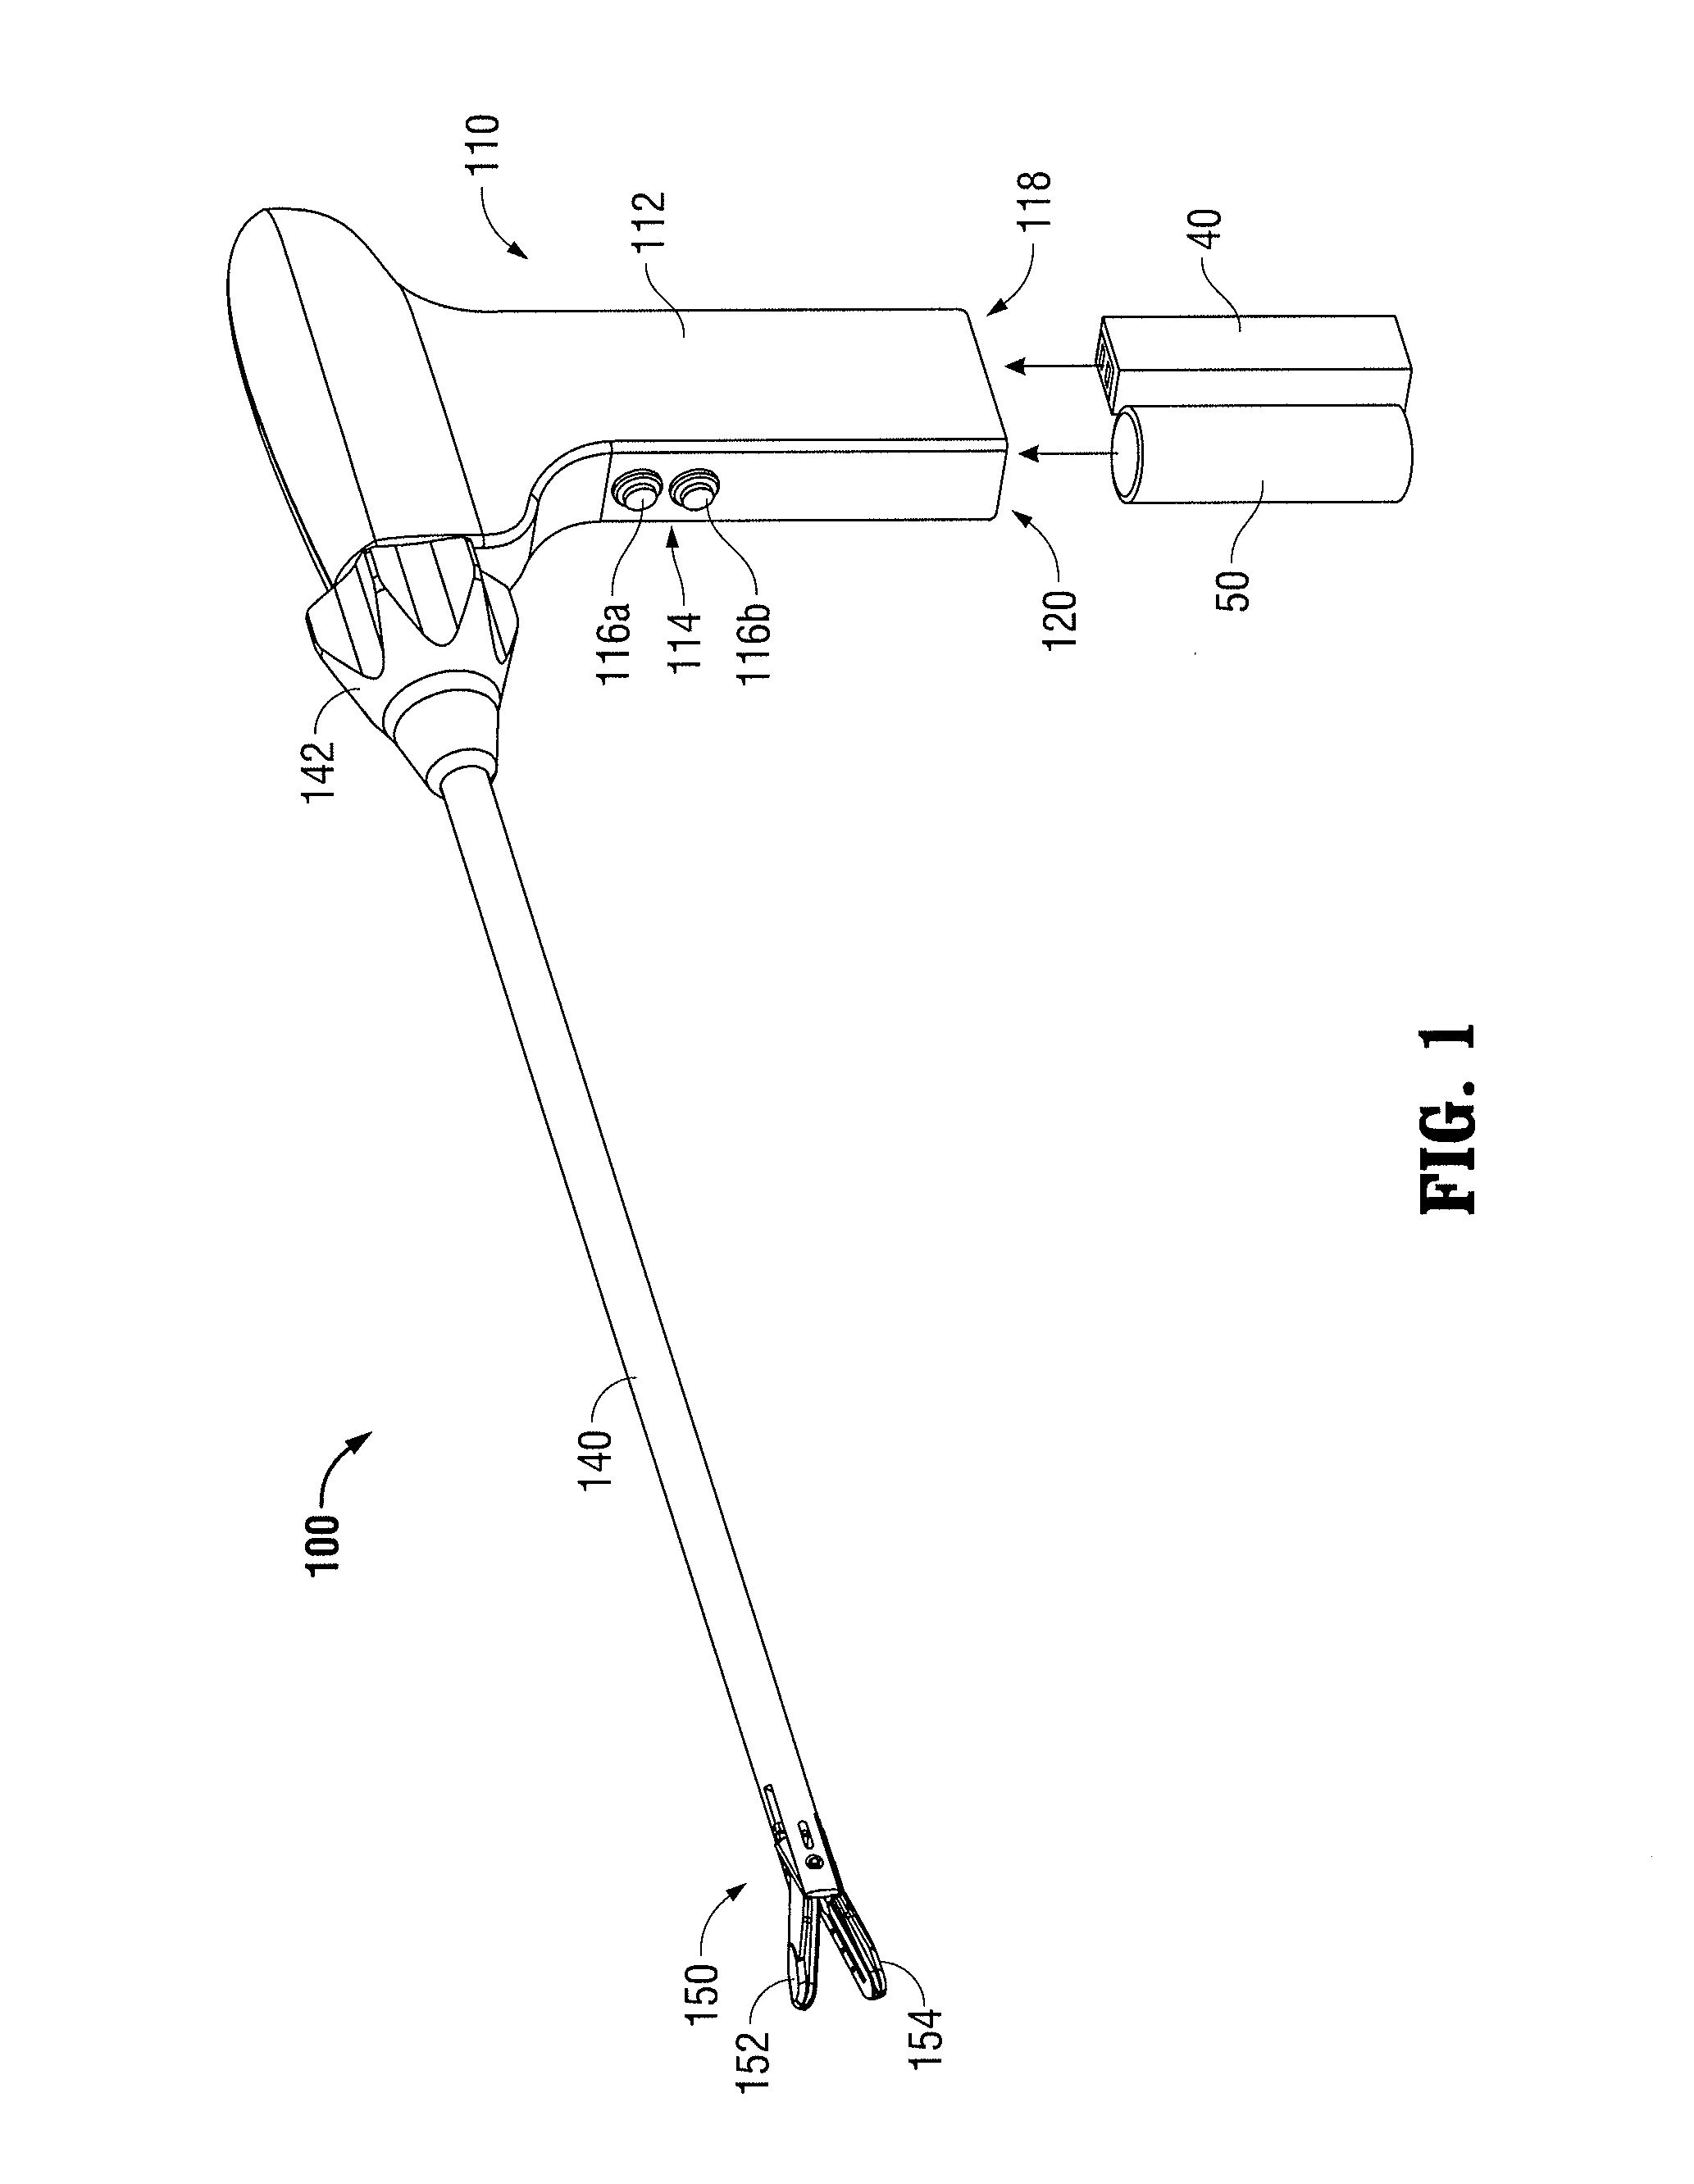 Combined presentation unit for reposable battery operated surgical system